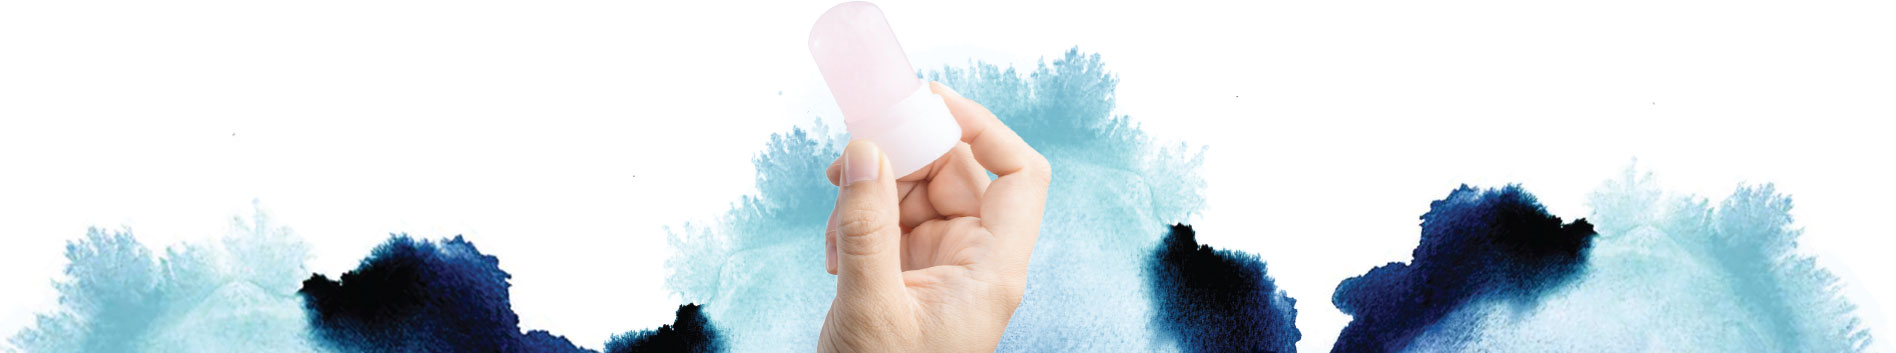 WHY IS ALUM A GREAT ALTERNATIVE TO CONVENTIONAL DEODORANT?